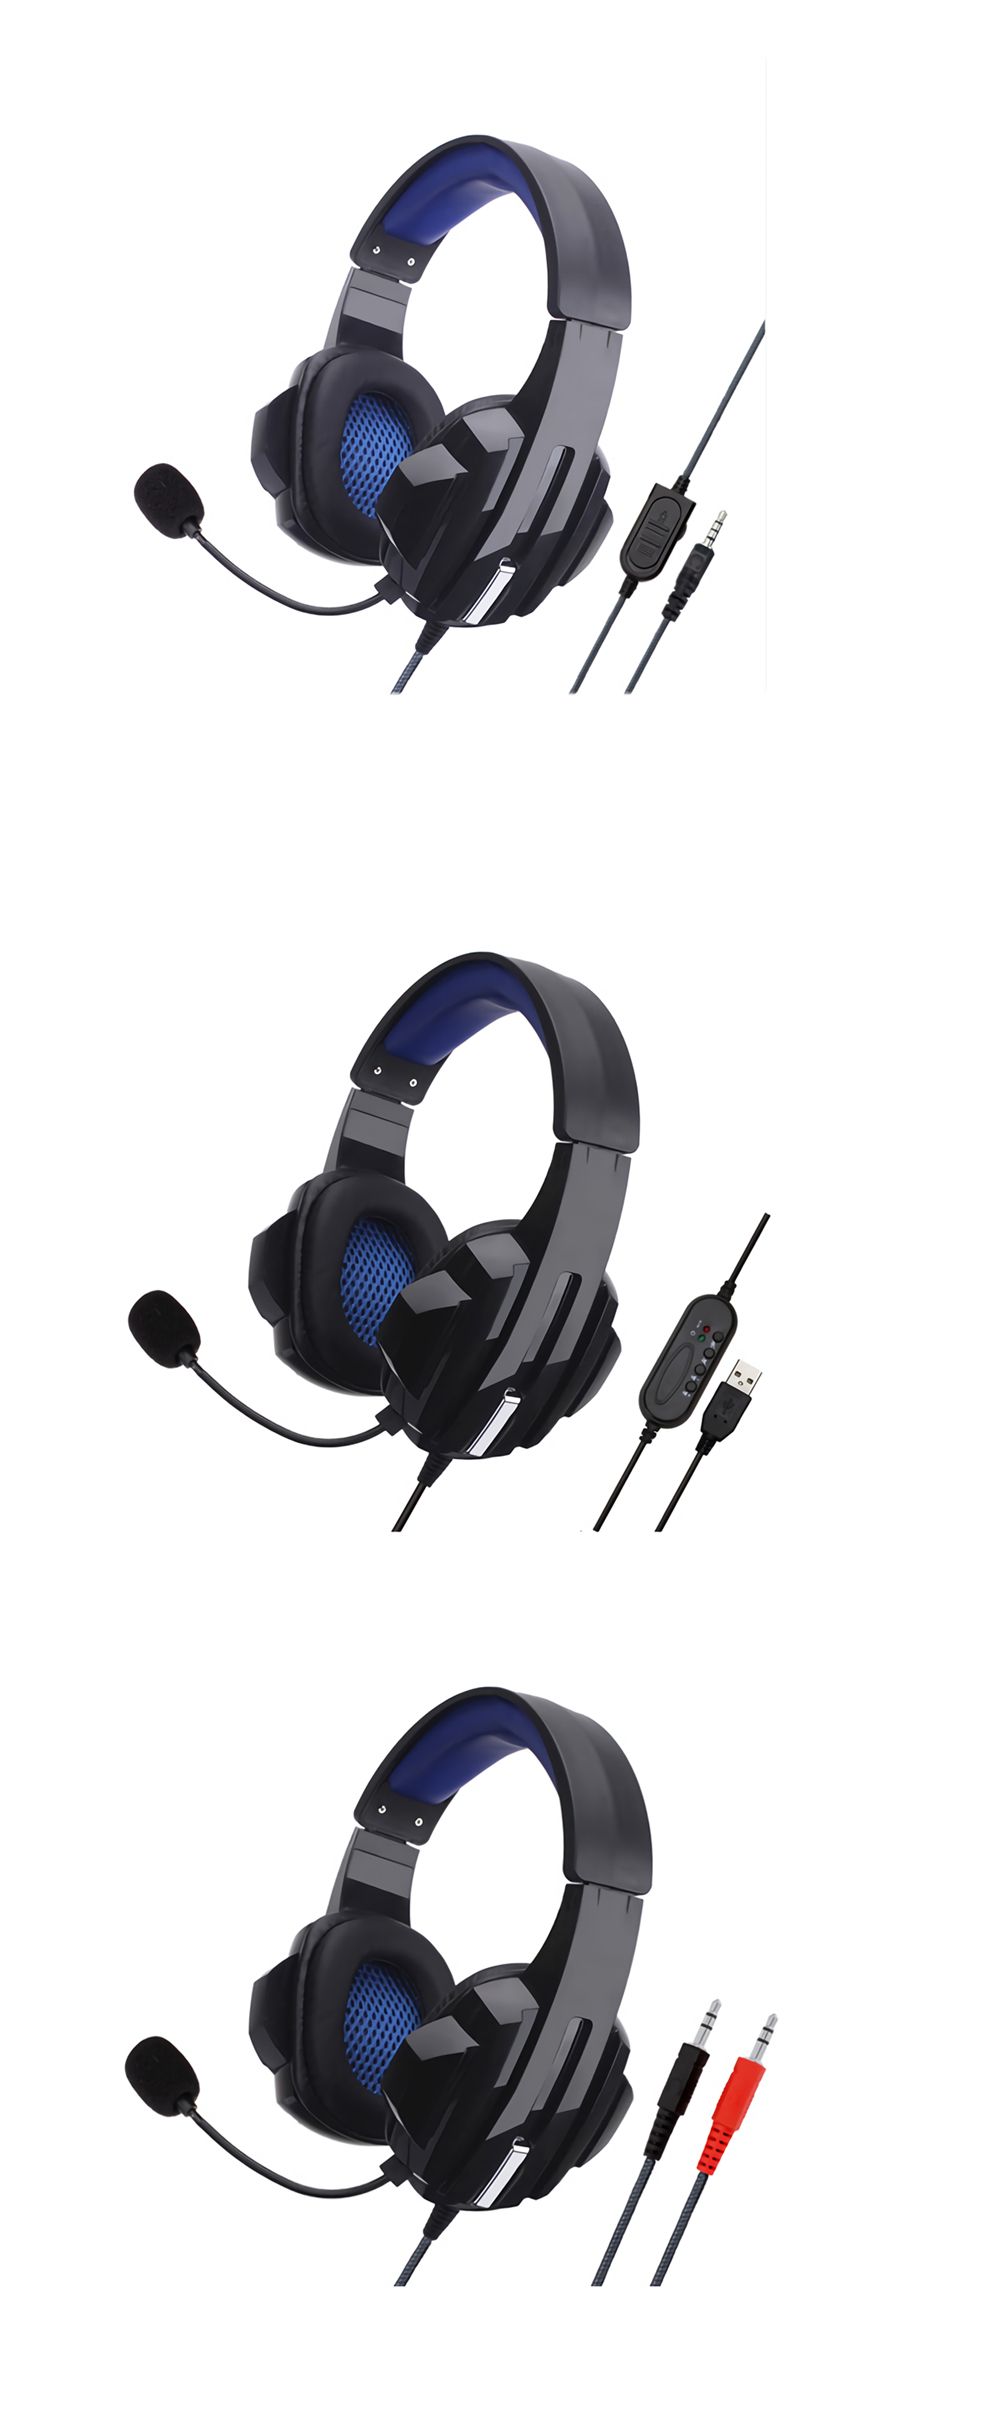 Soyto-SY450MV-Game-Headphone-35mm-Wired-Bass-Gaming-Headset-Surround-Stereo-Sound-Earphone-Headphone-1696173